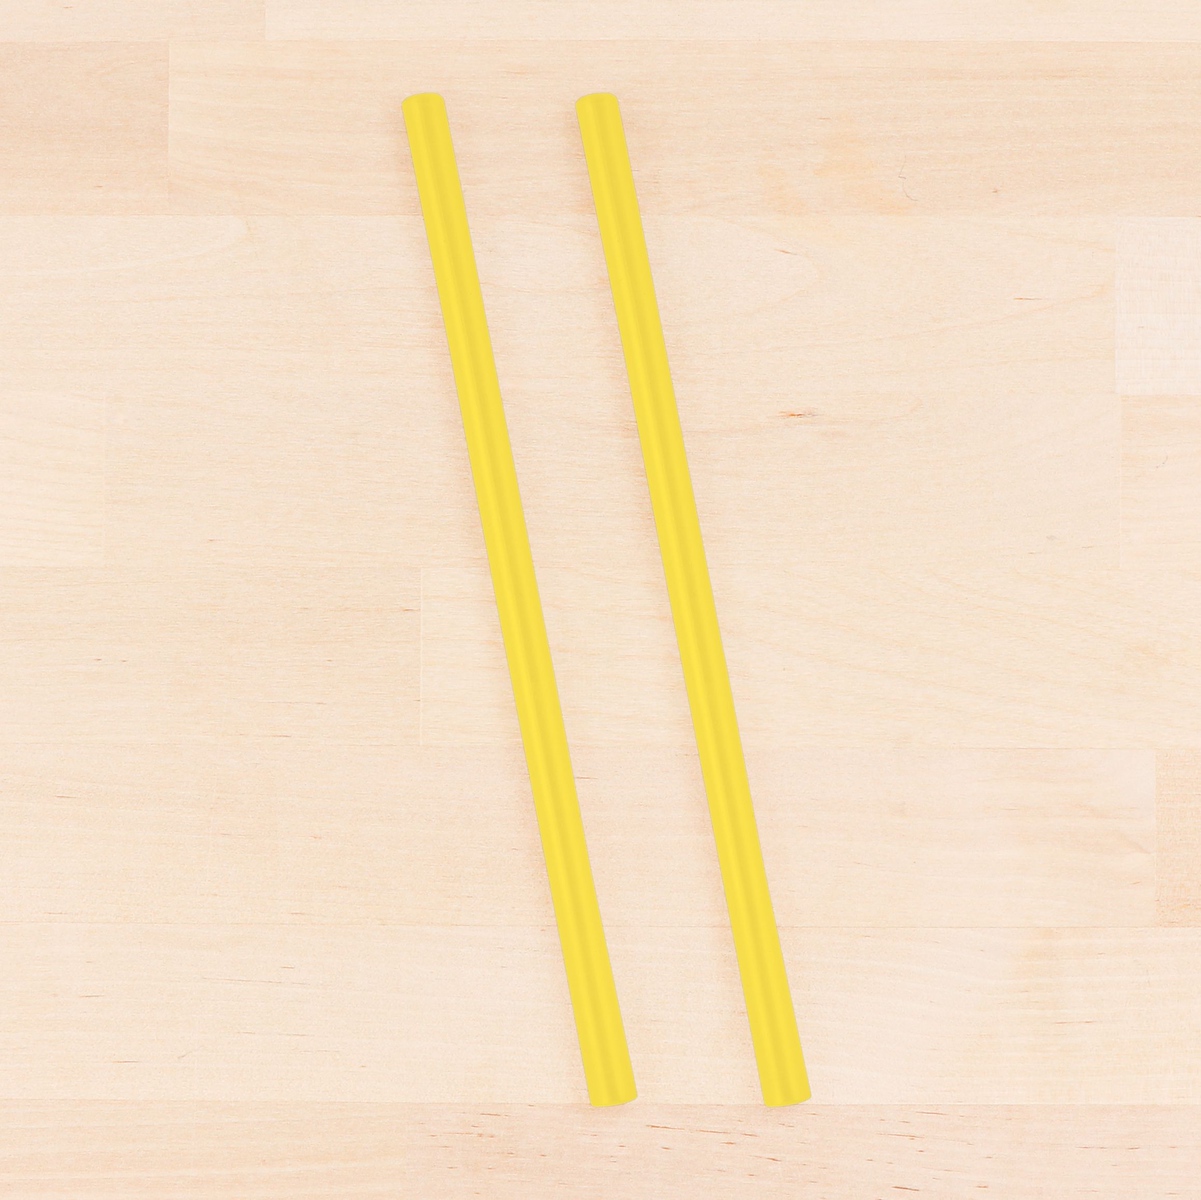 Replay Replacement Silicone Straw Yellow